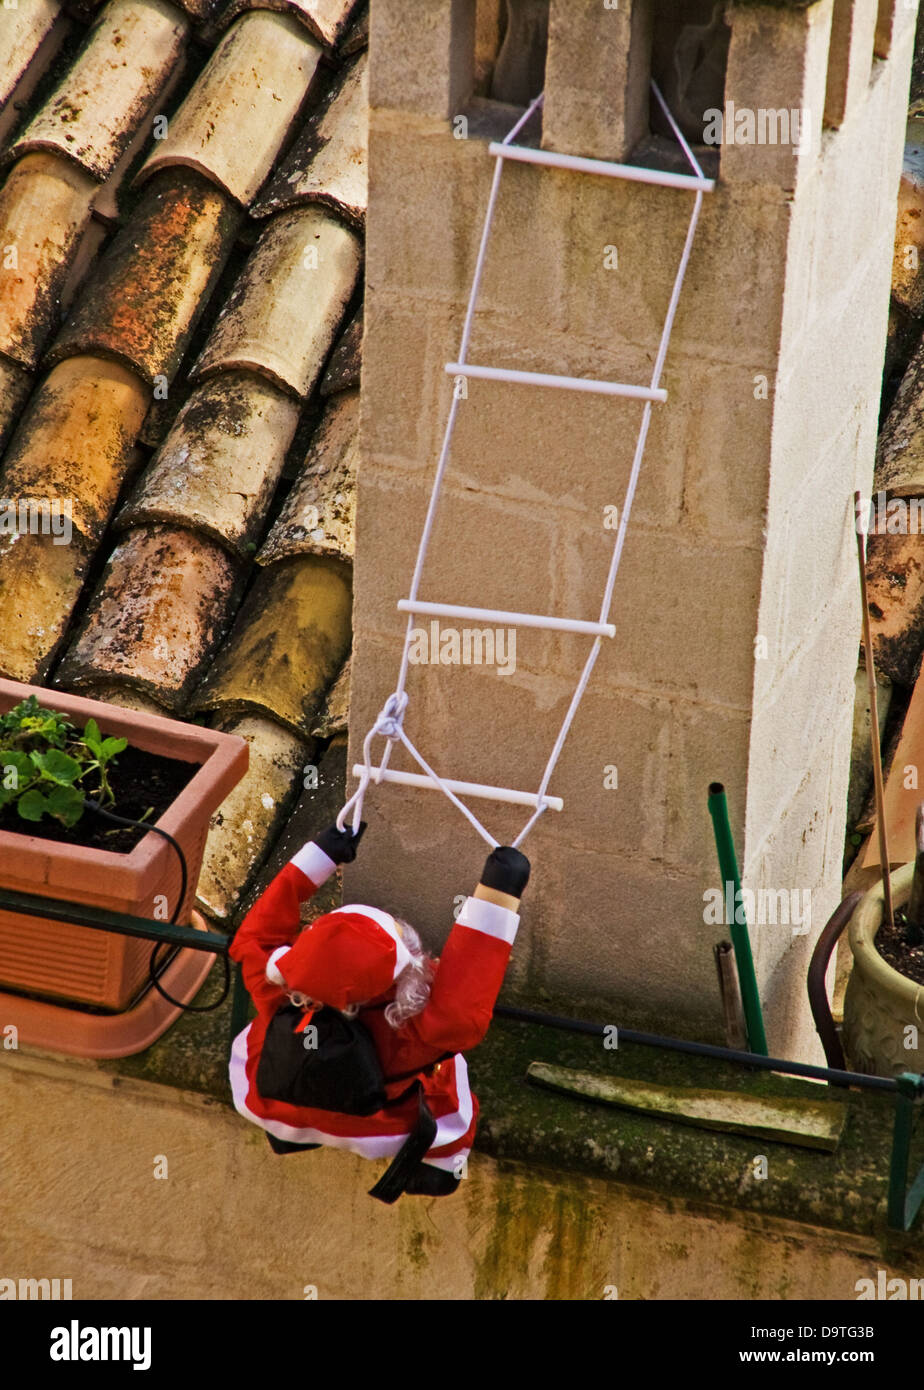 Father Christmas trying to climb a chimney with the aid of a stepladder so he can get inside the house and deliver presents! Stock Photo